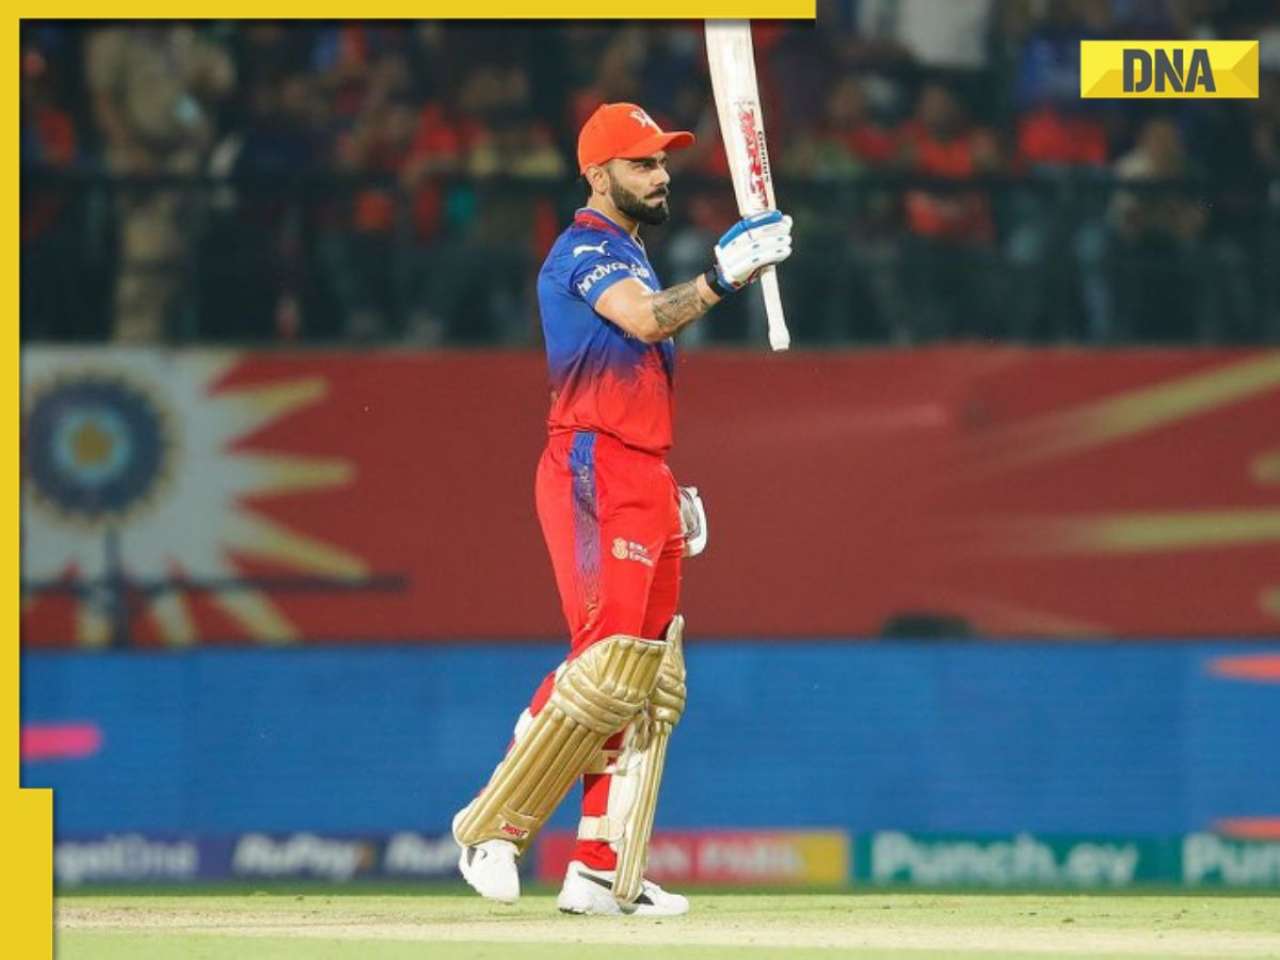 RCB vs DC: Virat Kohli creates history, becomes first player in IPL history to achieve this record